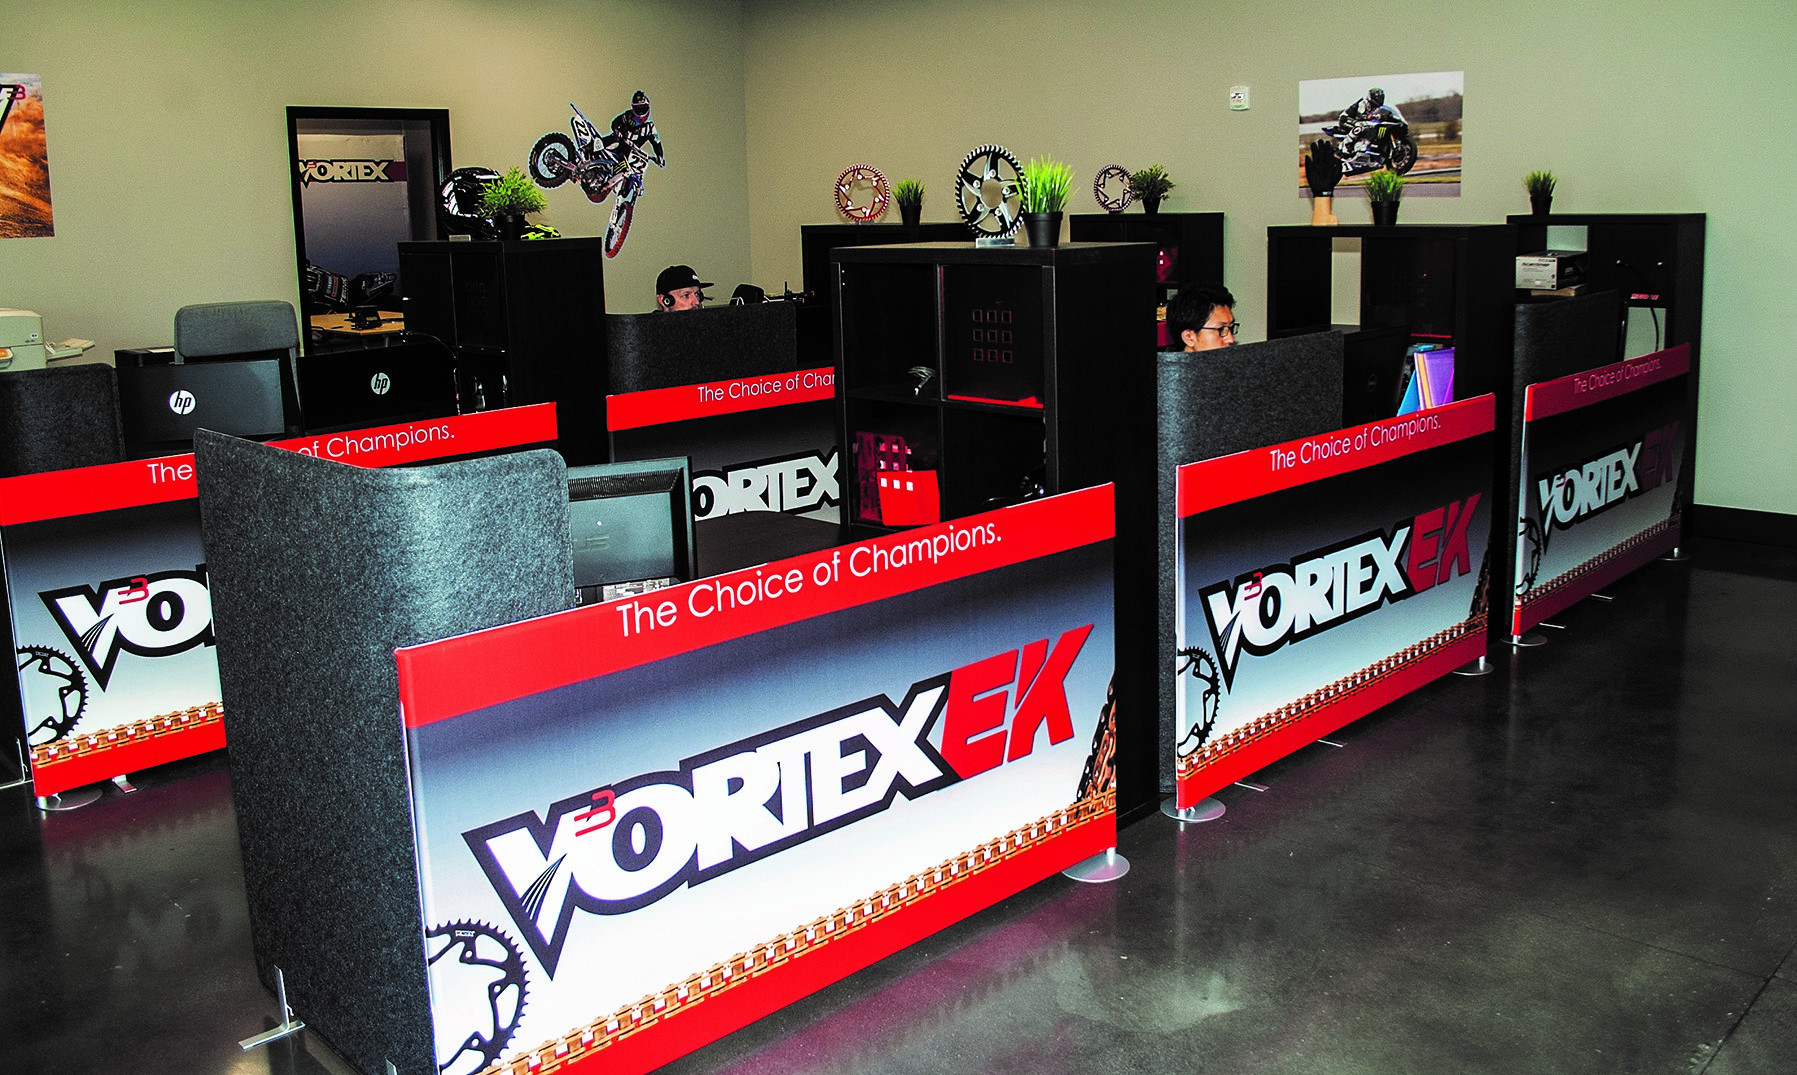 The offices at Vortex Racing in Salt Lake City, Utah, as seen in 2017. Photo by David Swarts.